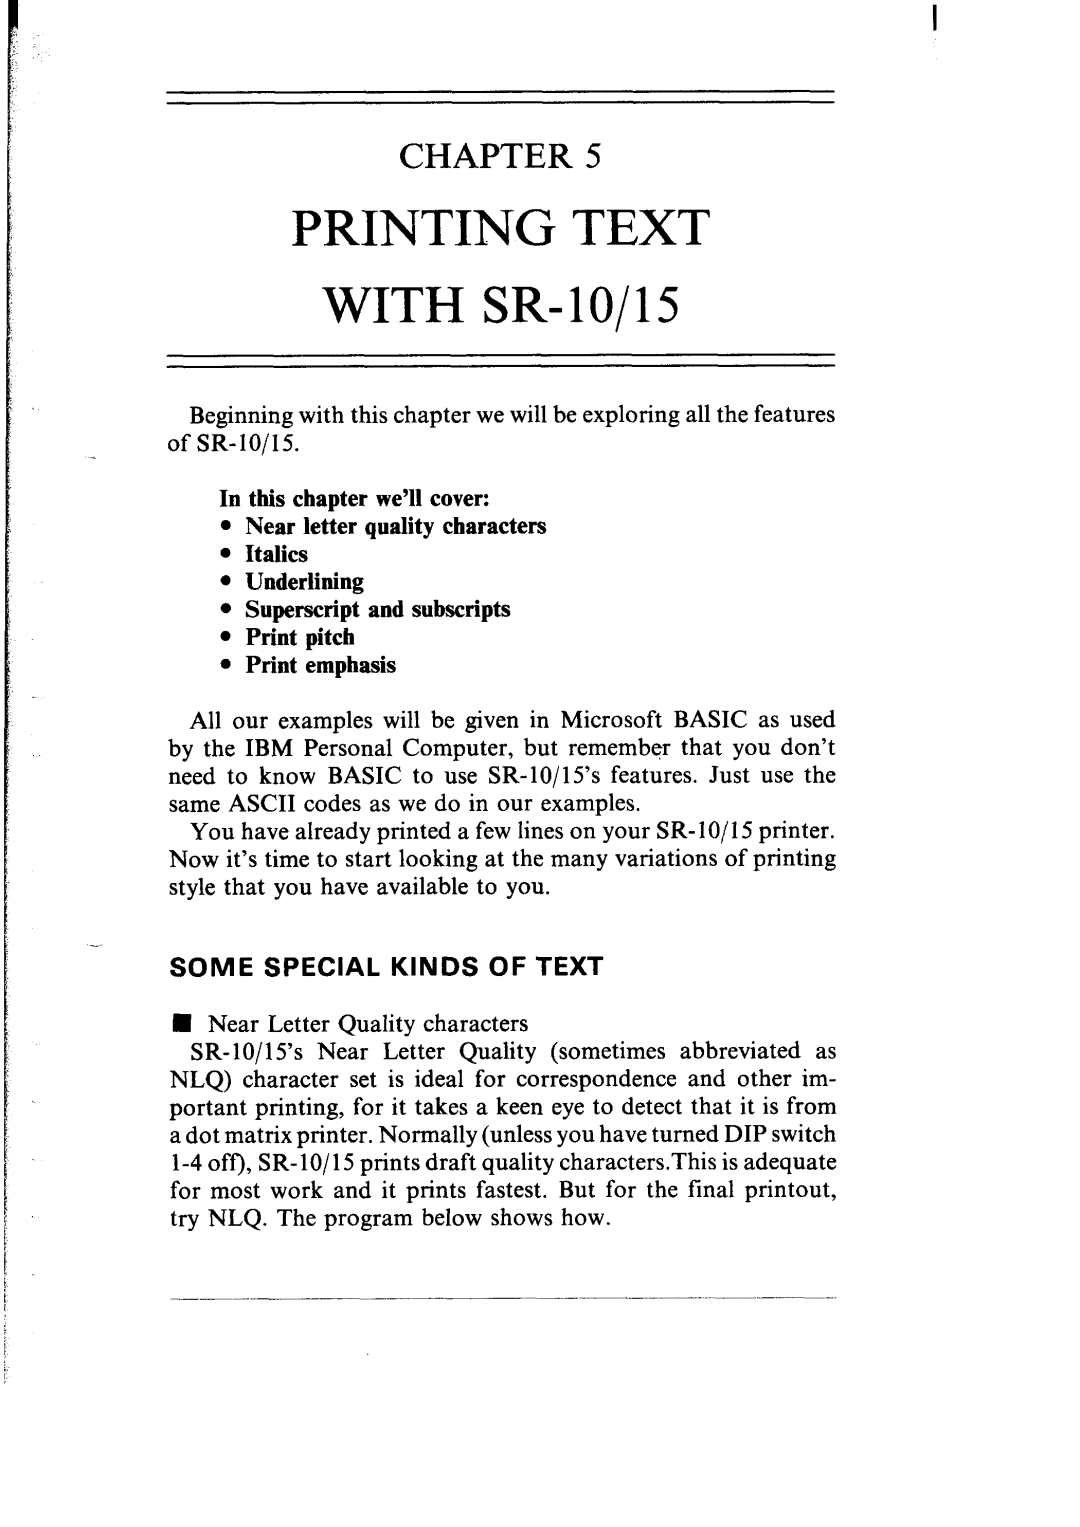 Star Micronics SR-10/I5 PRINTING TEXT WITH SR-lo/15, In this chapter we’ll cover Near letter quality characters Italics 